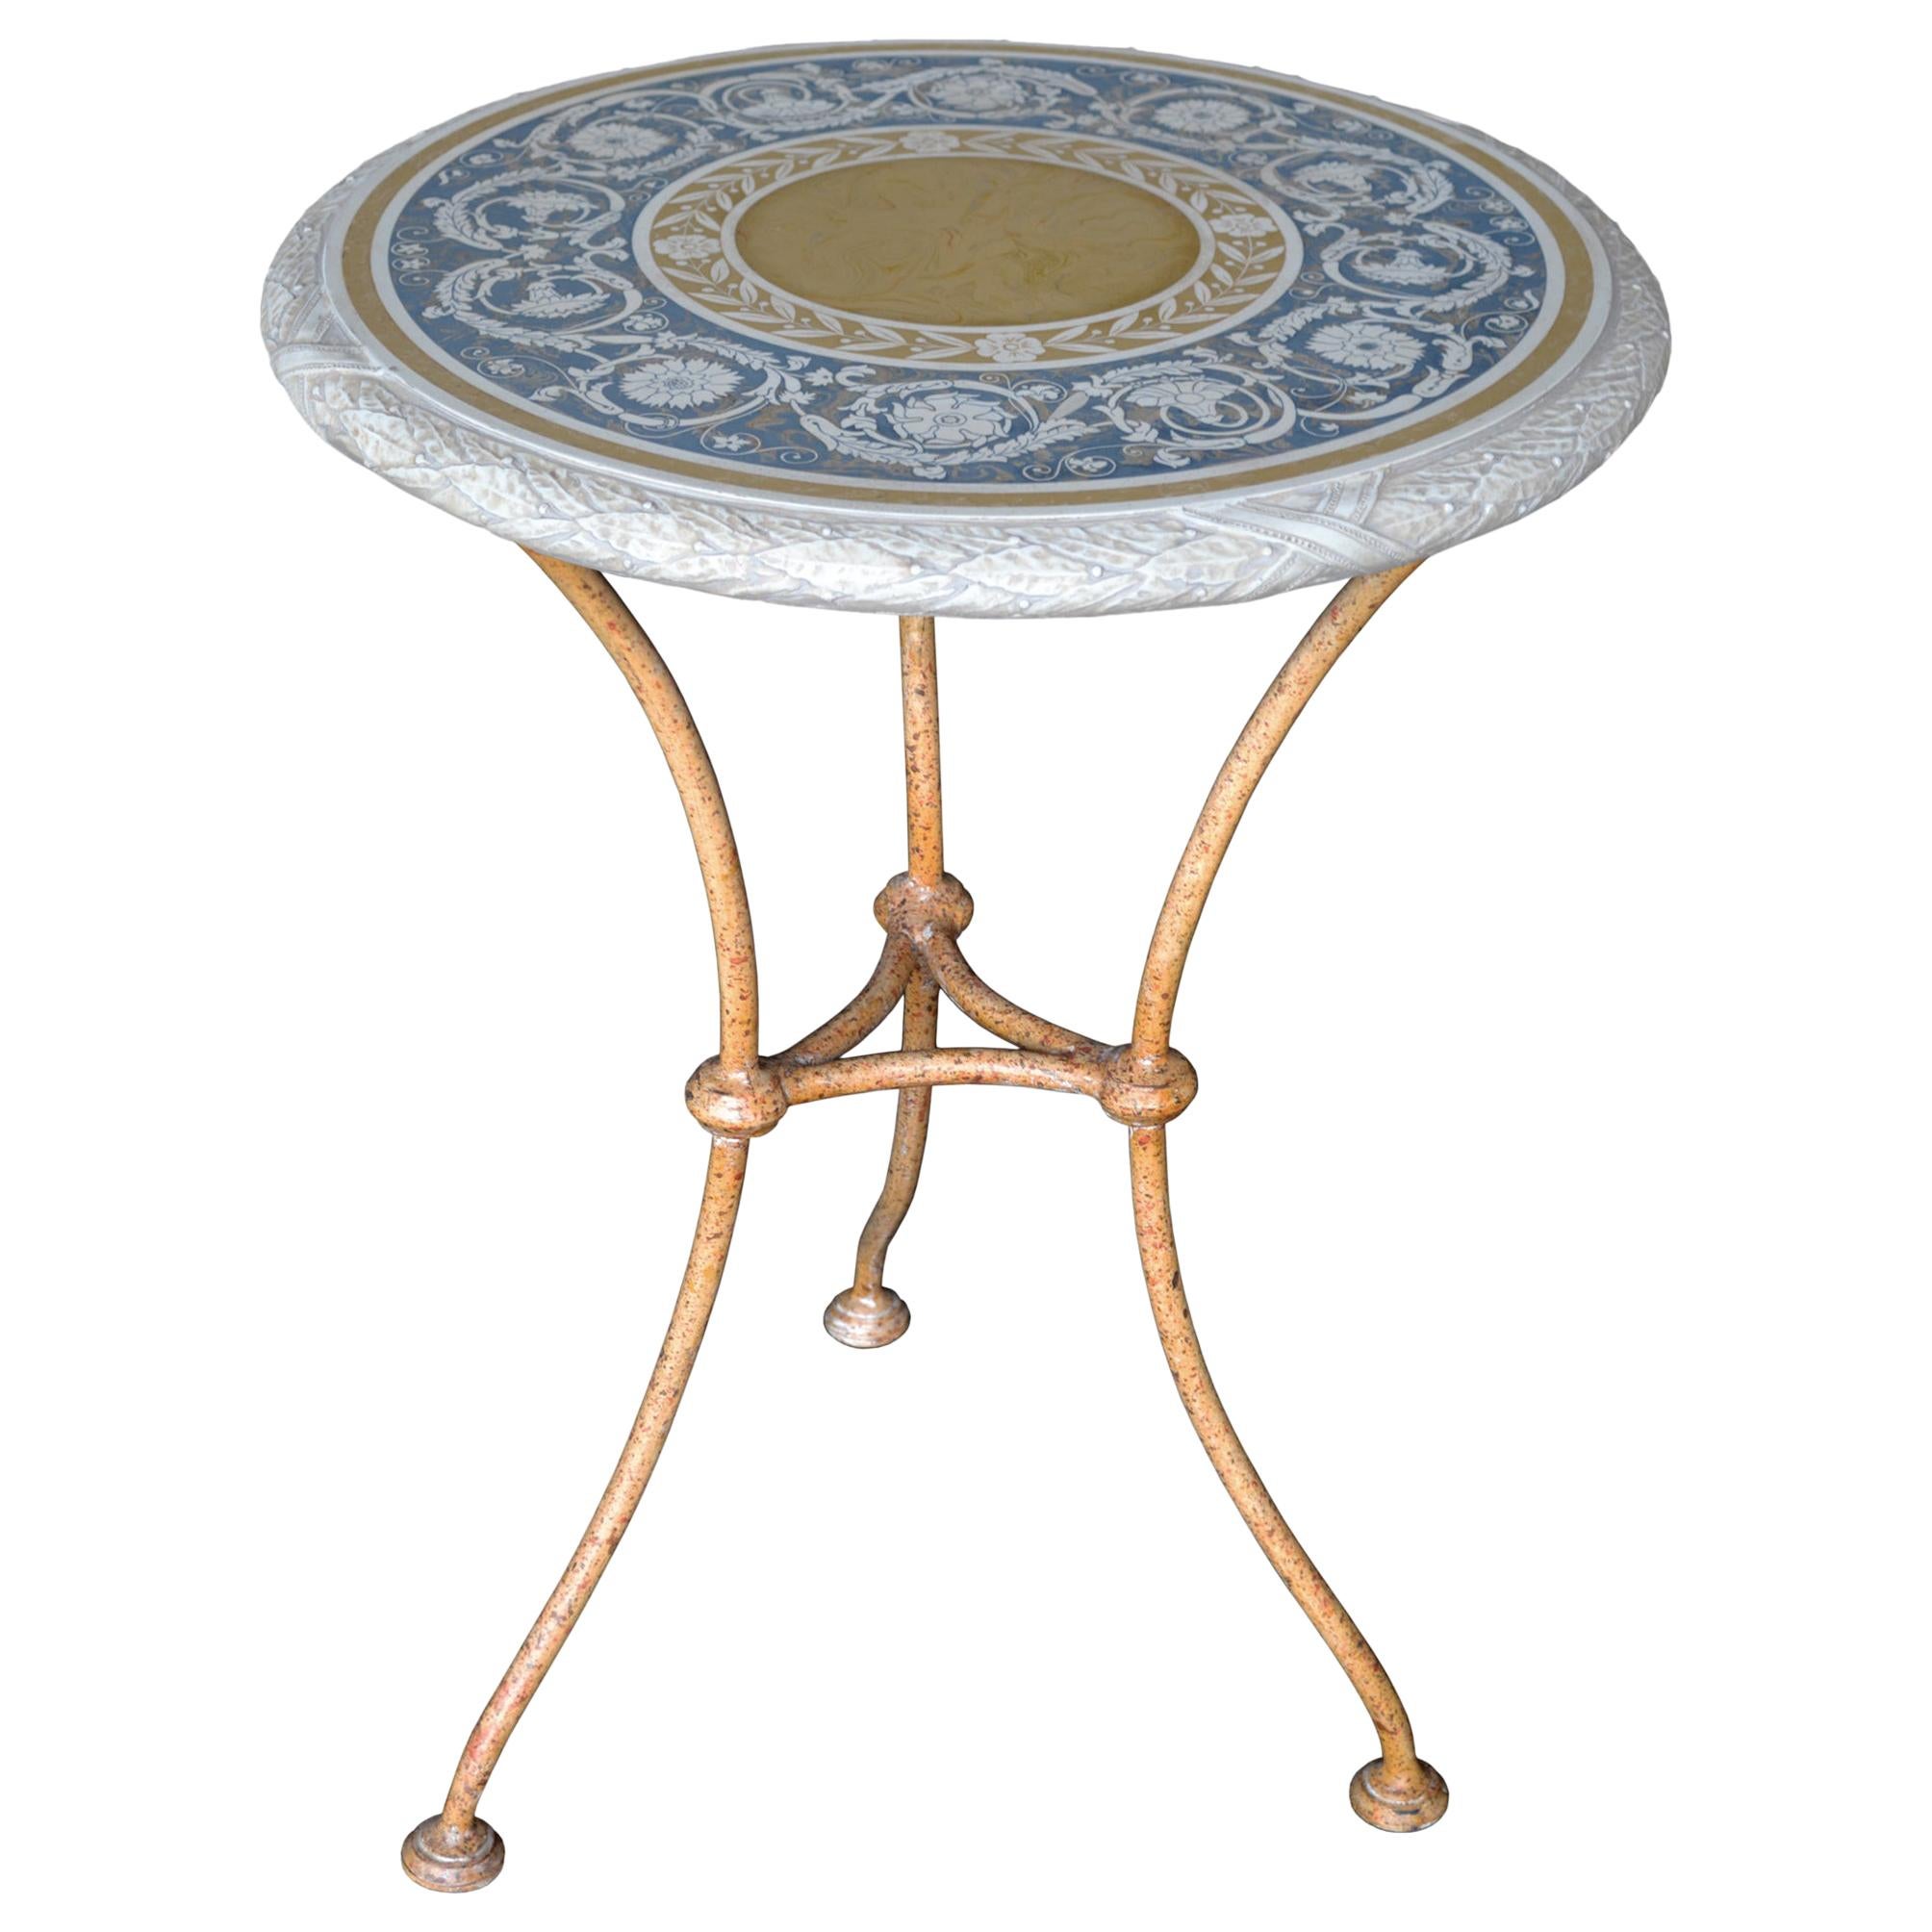 Side table scagliola inlaid top iron base handmade in Italy by Cupioli available For Sale